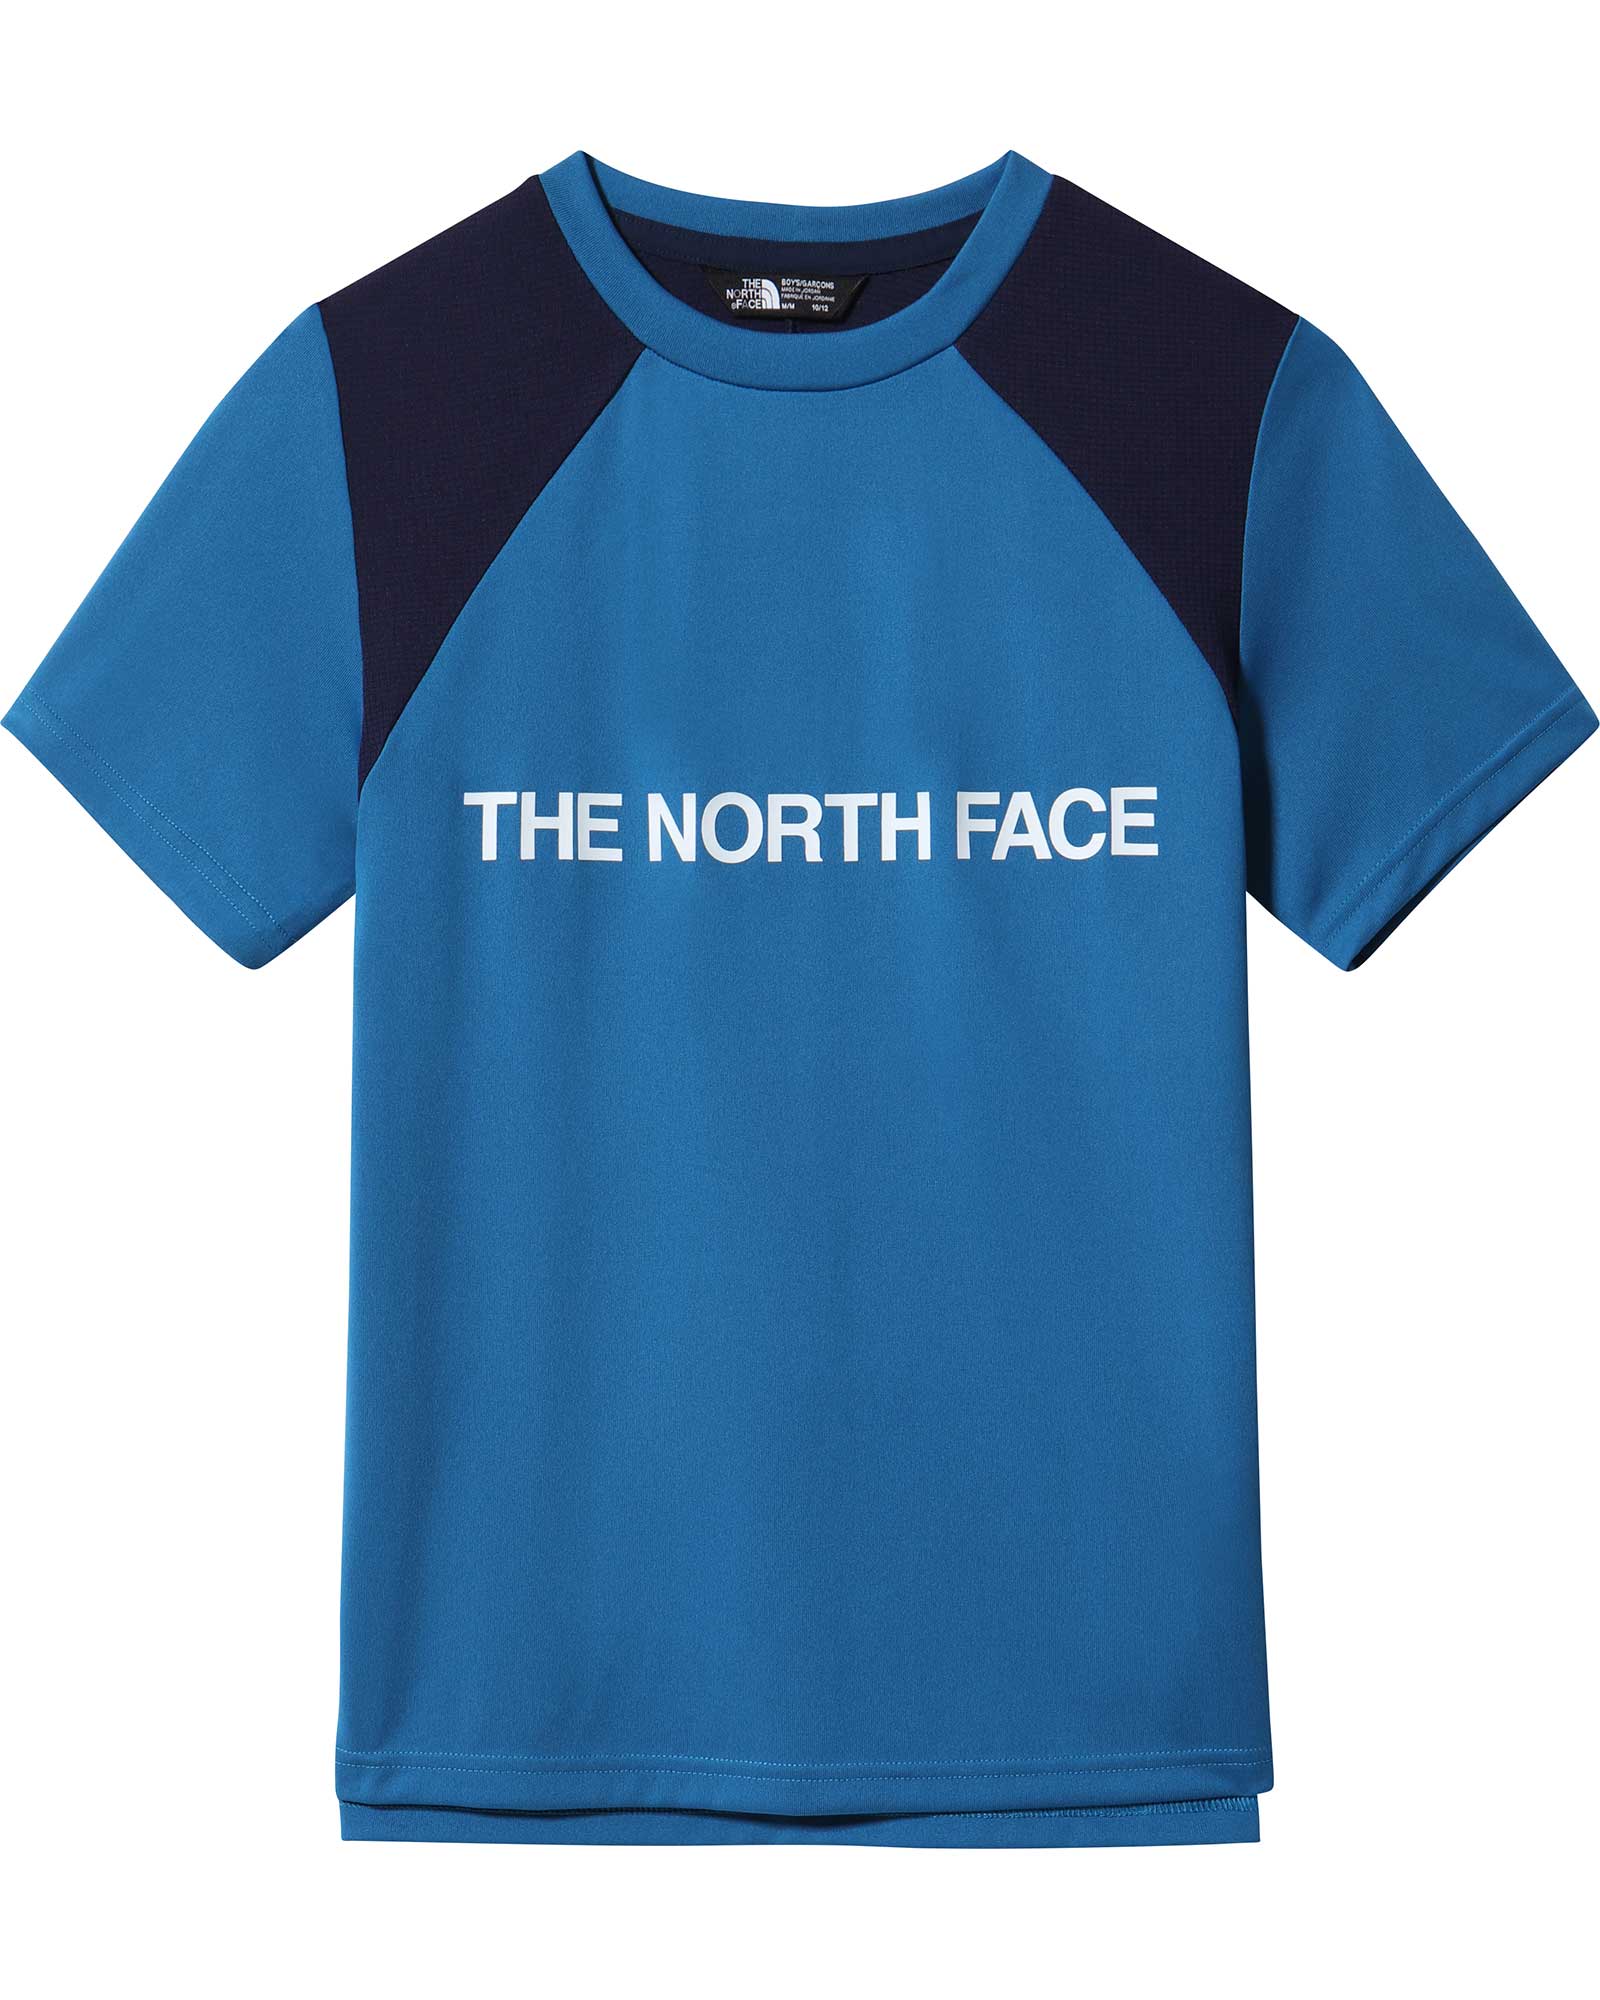 The North Face Never Stop Boys’ T Shirt - Banff Blue L